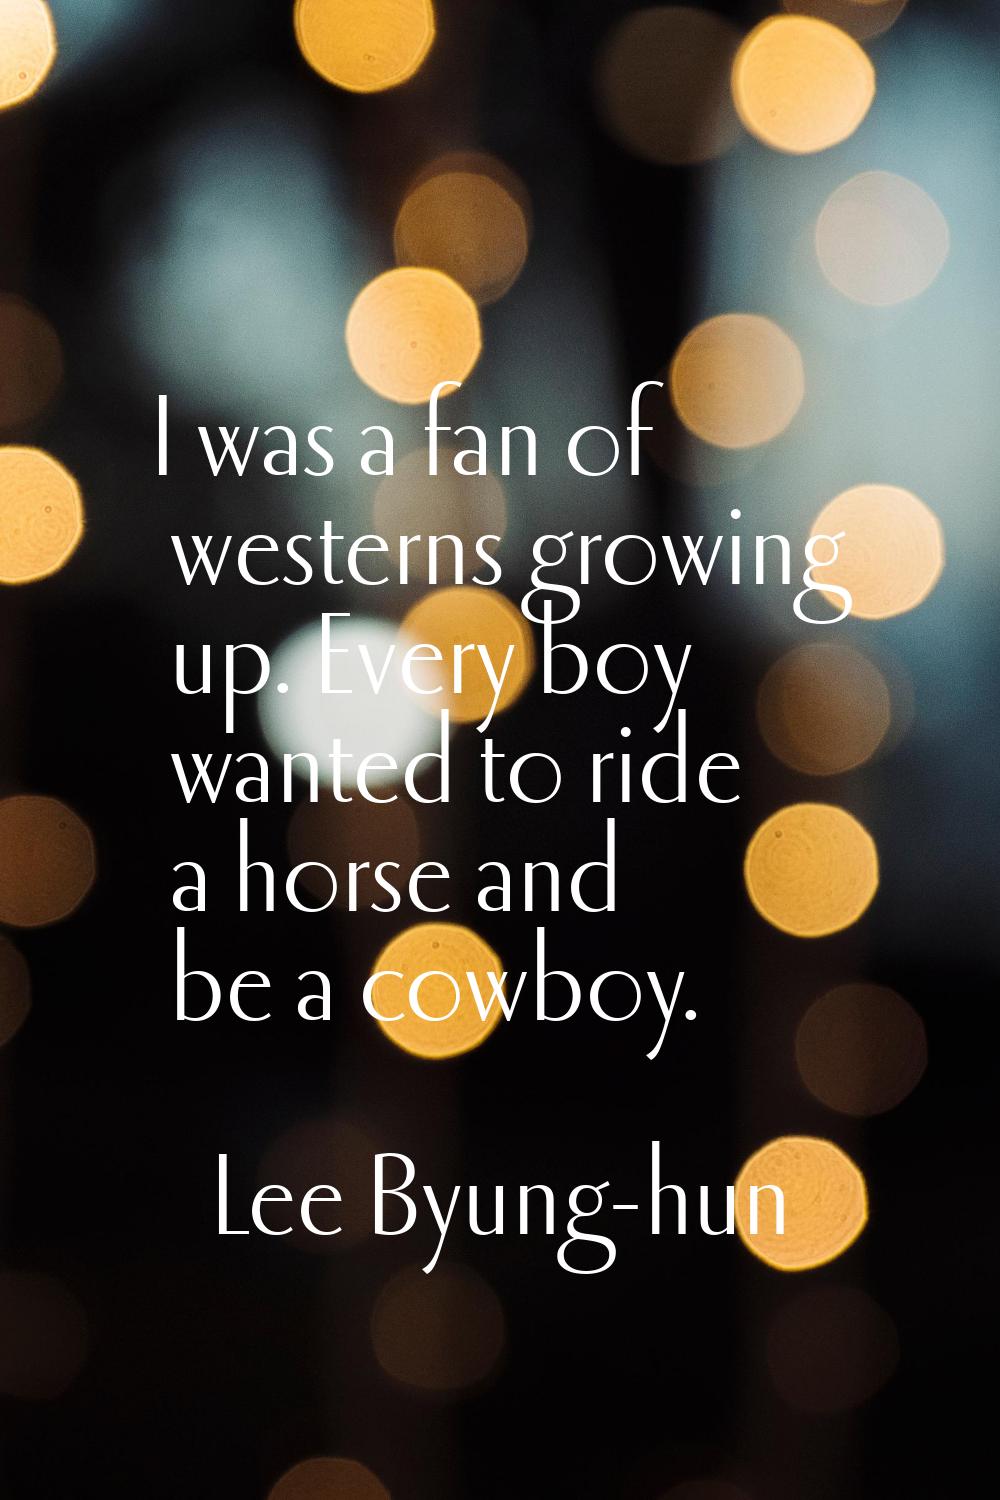 I was a fan of westerns growing up. Every boy wanted to ride a horse and be a cowboy.